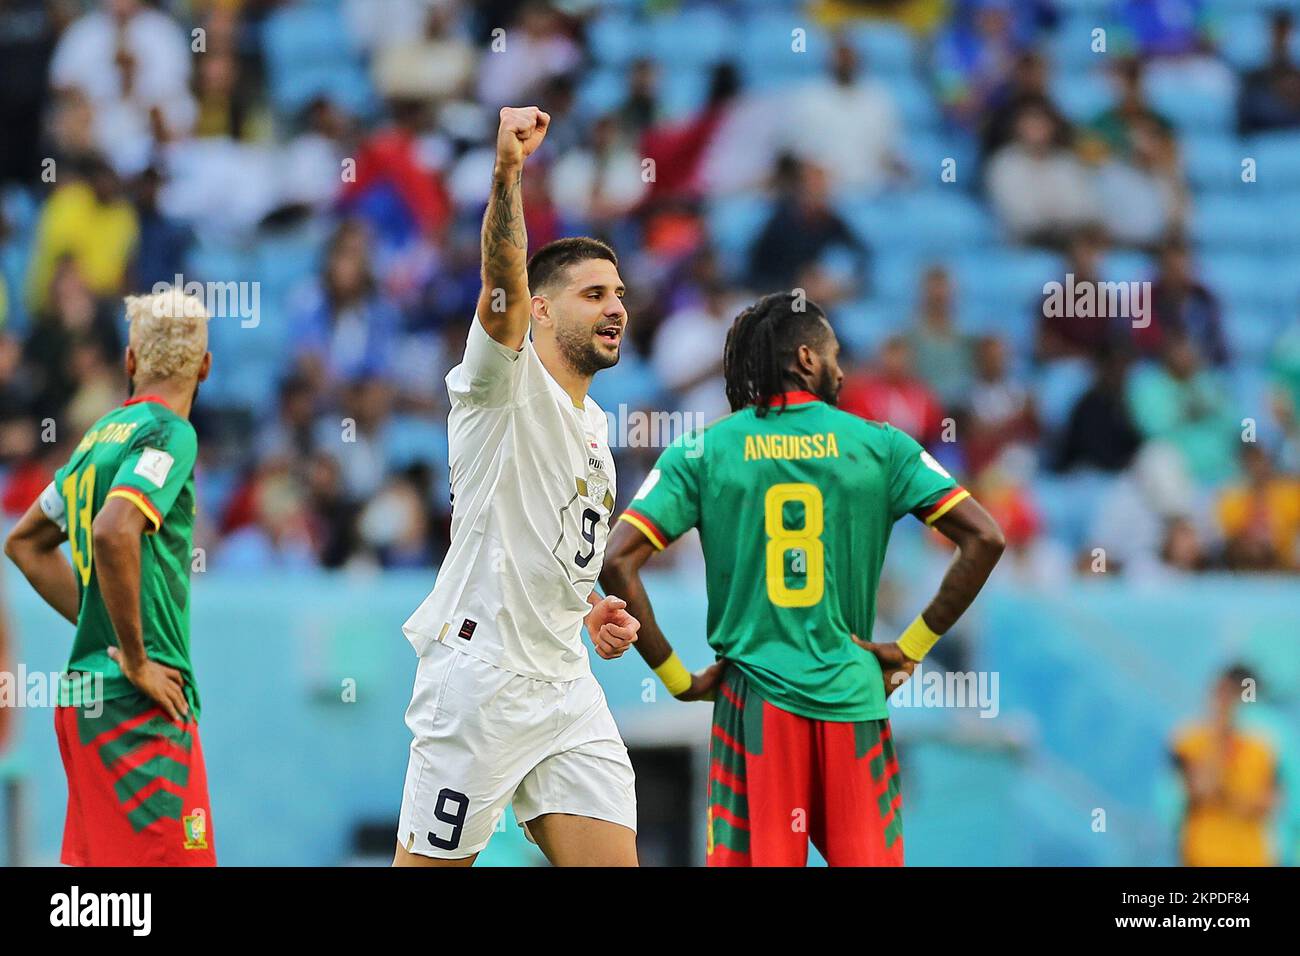 Doha, Qatar. 28th Nov, 2022. Aleksandar Mitrovic of Serbia, celebrates his goal during the match between Cameroon and Serbia, for the 2nd round of Group G of the FIFA World Cup Qatar 2022, Al Janoub Stadium this Monday 28. 30761 (Heuler Andrey/SPP) Credit: SPP Sport Press Photo. /Alamy Live News Stock Photo